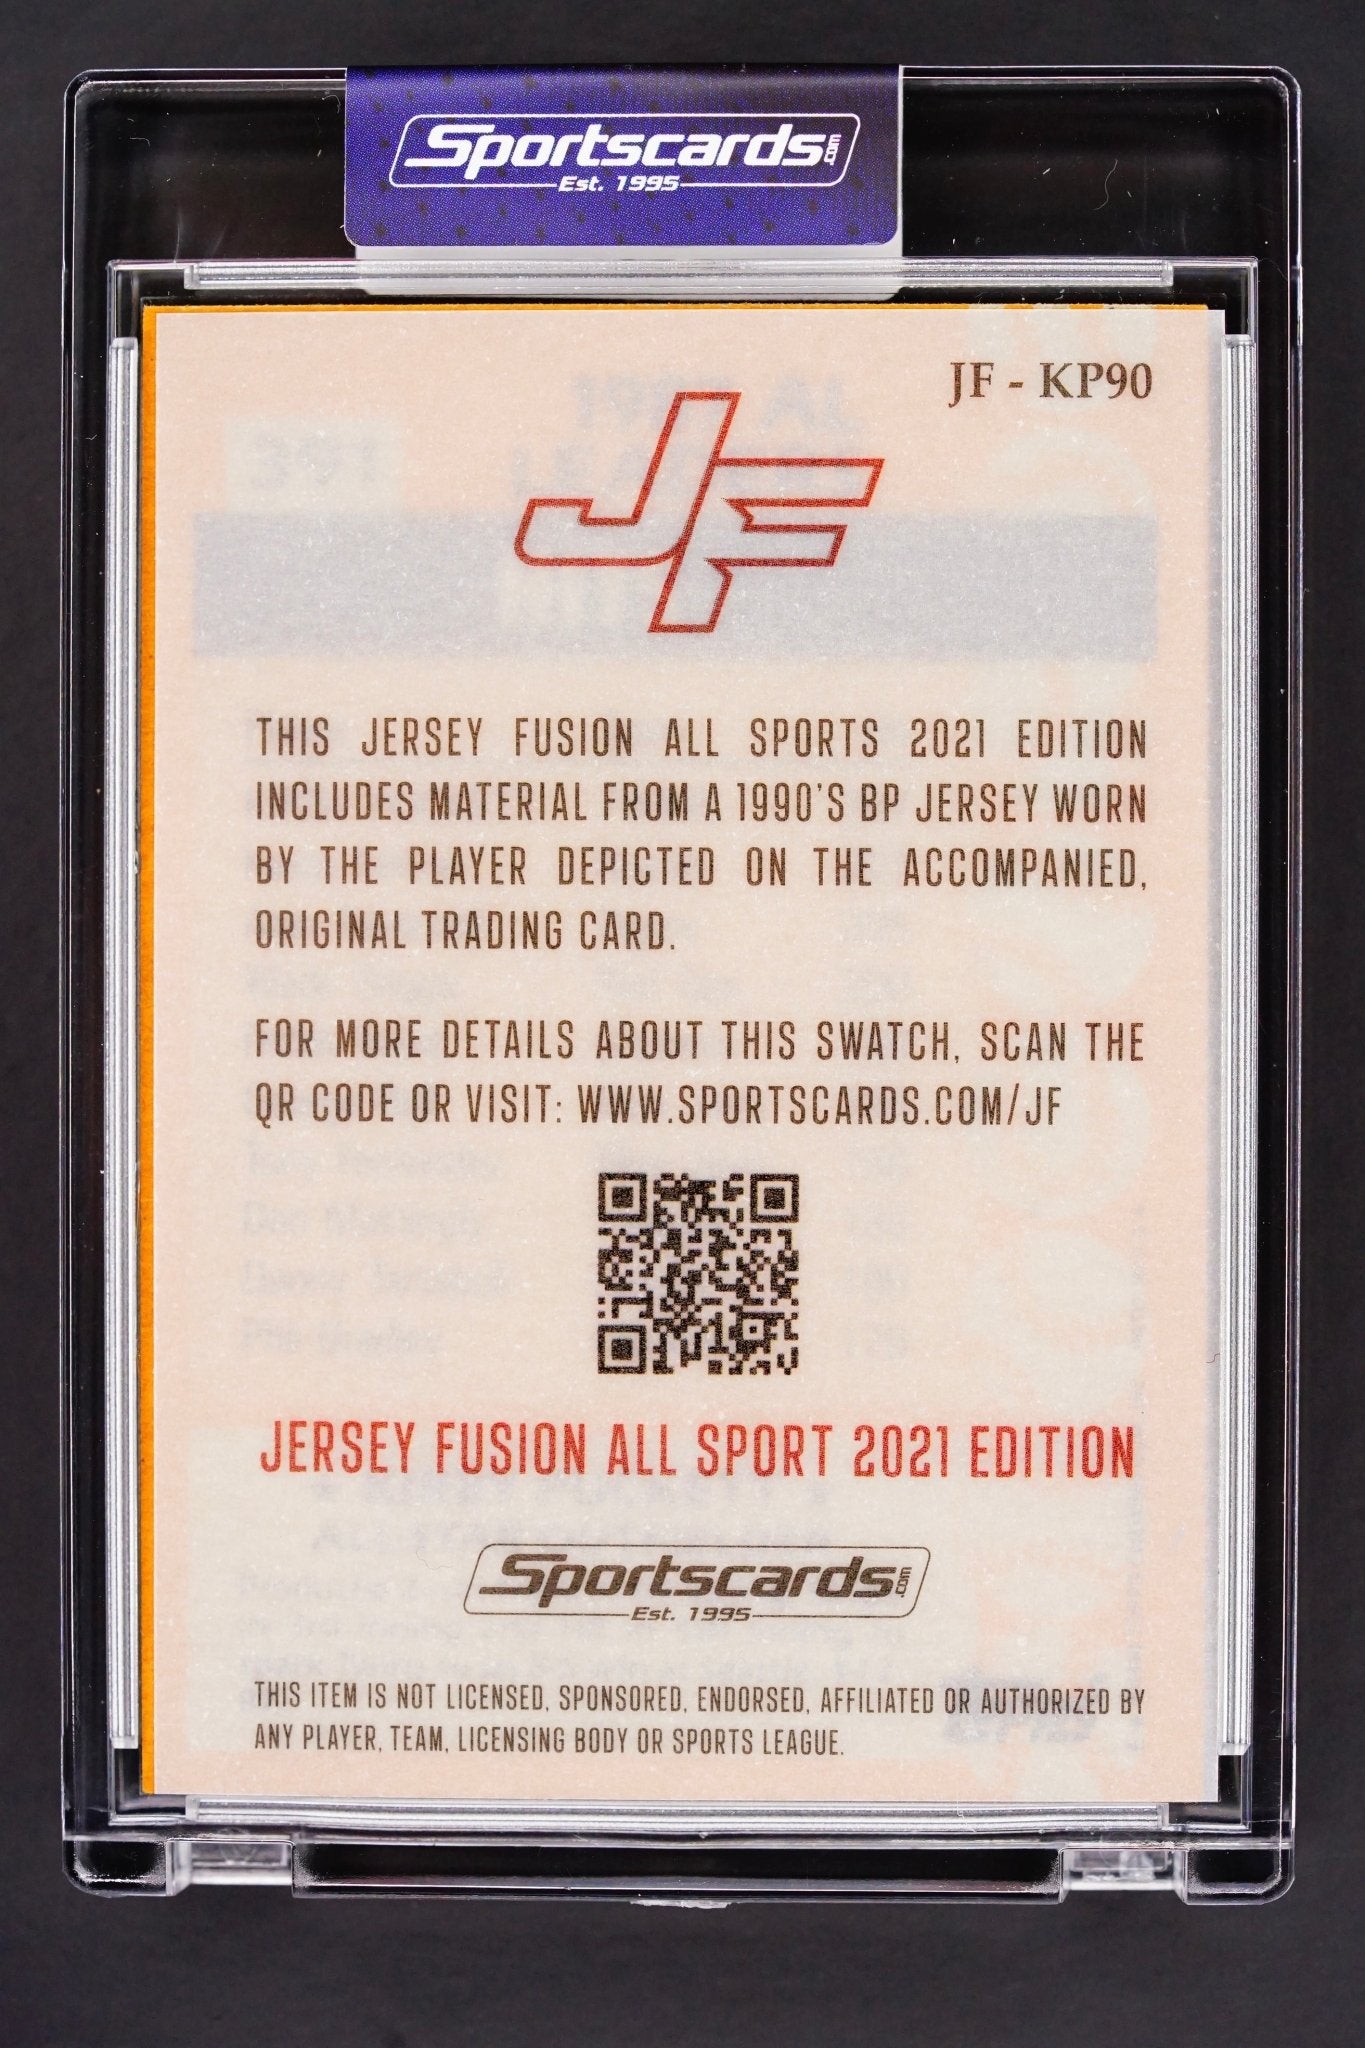 BaseBall Card: Kirby Puckett Game used - THE CARD SPOT PTY LTD.Sports CardJersey Fusion